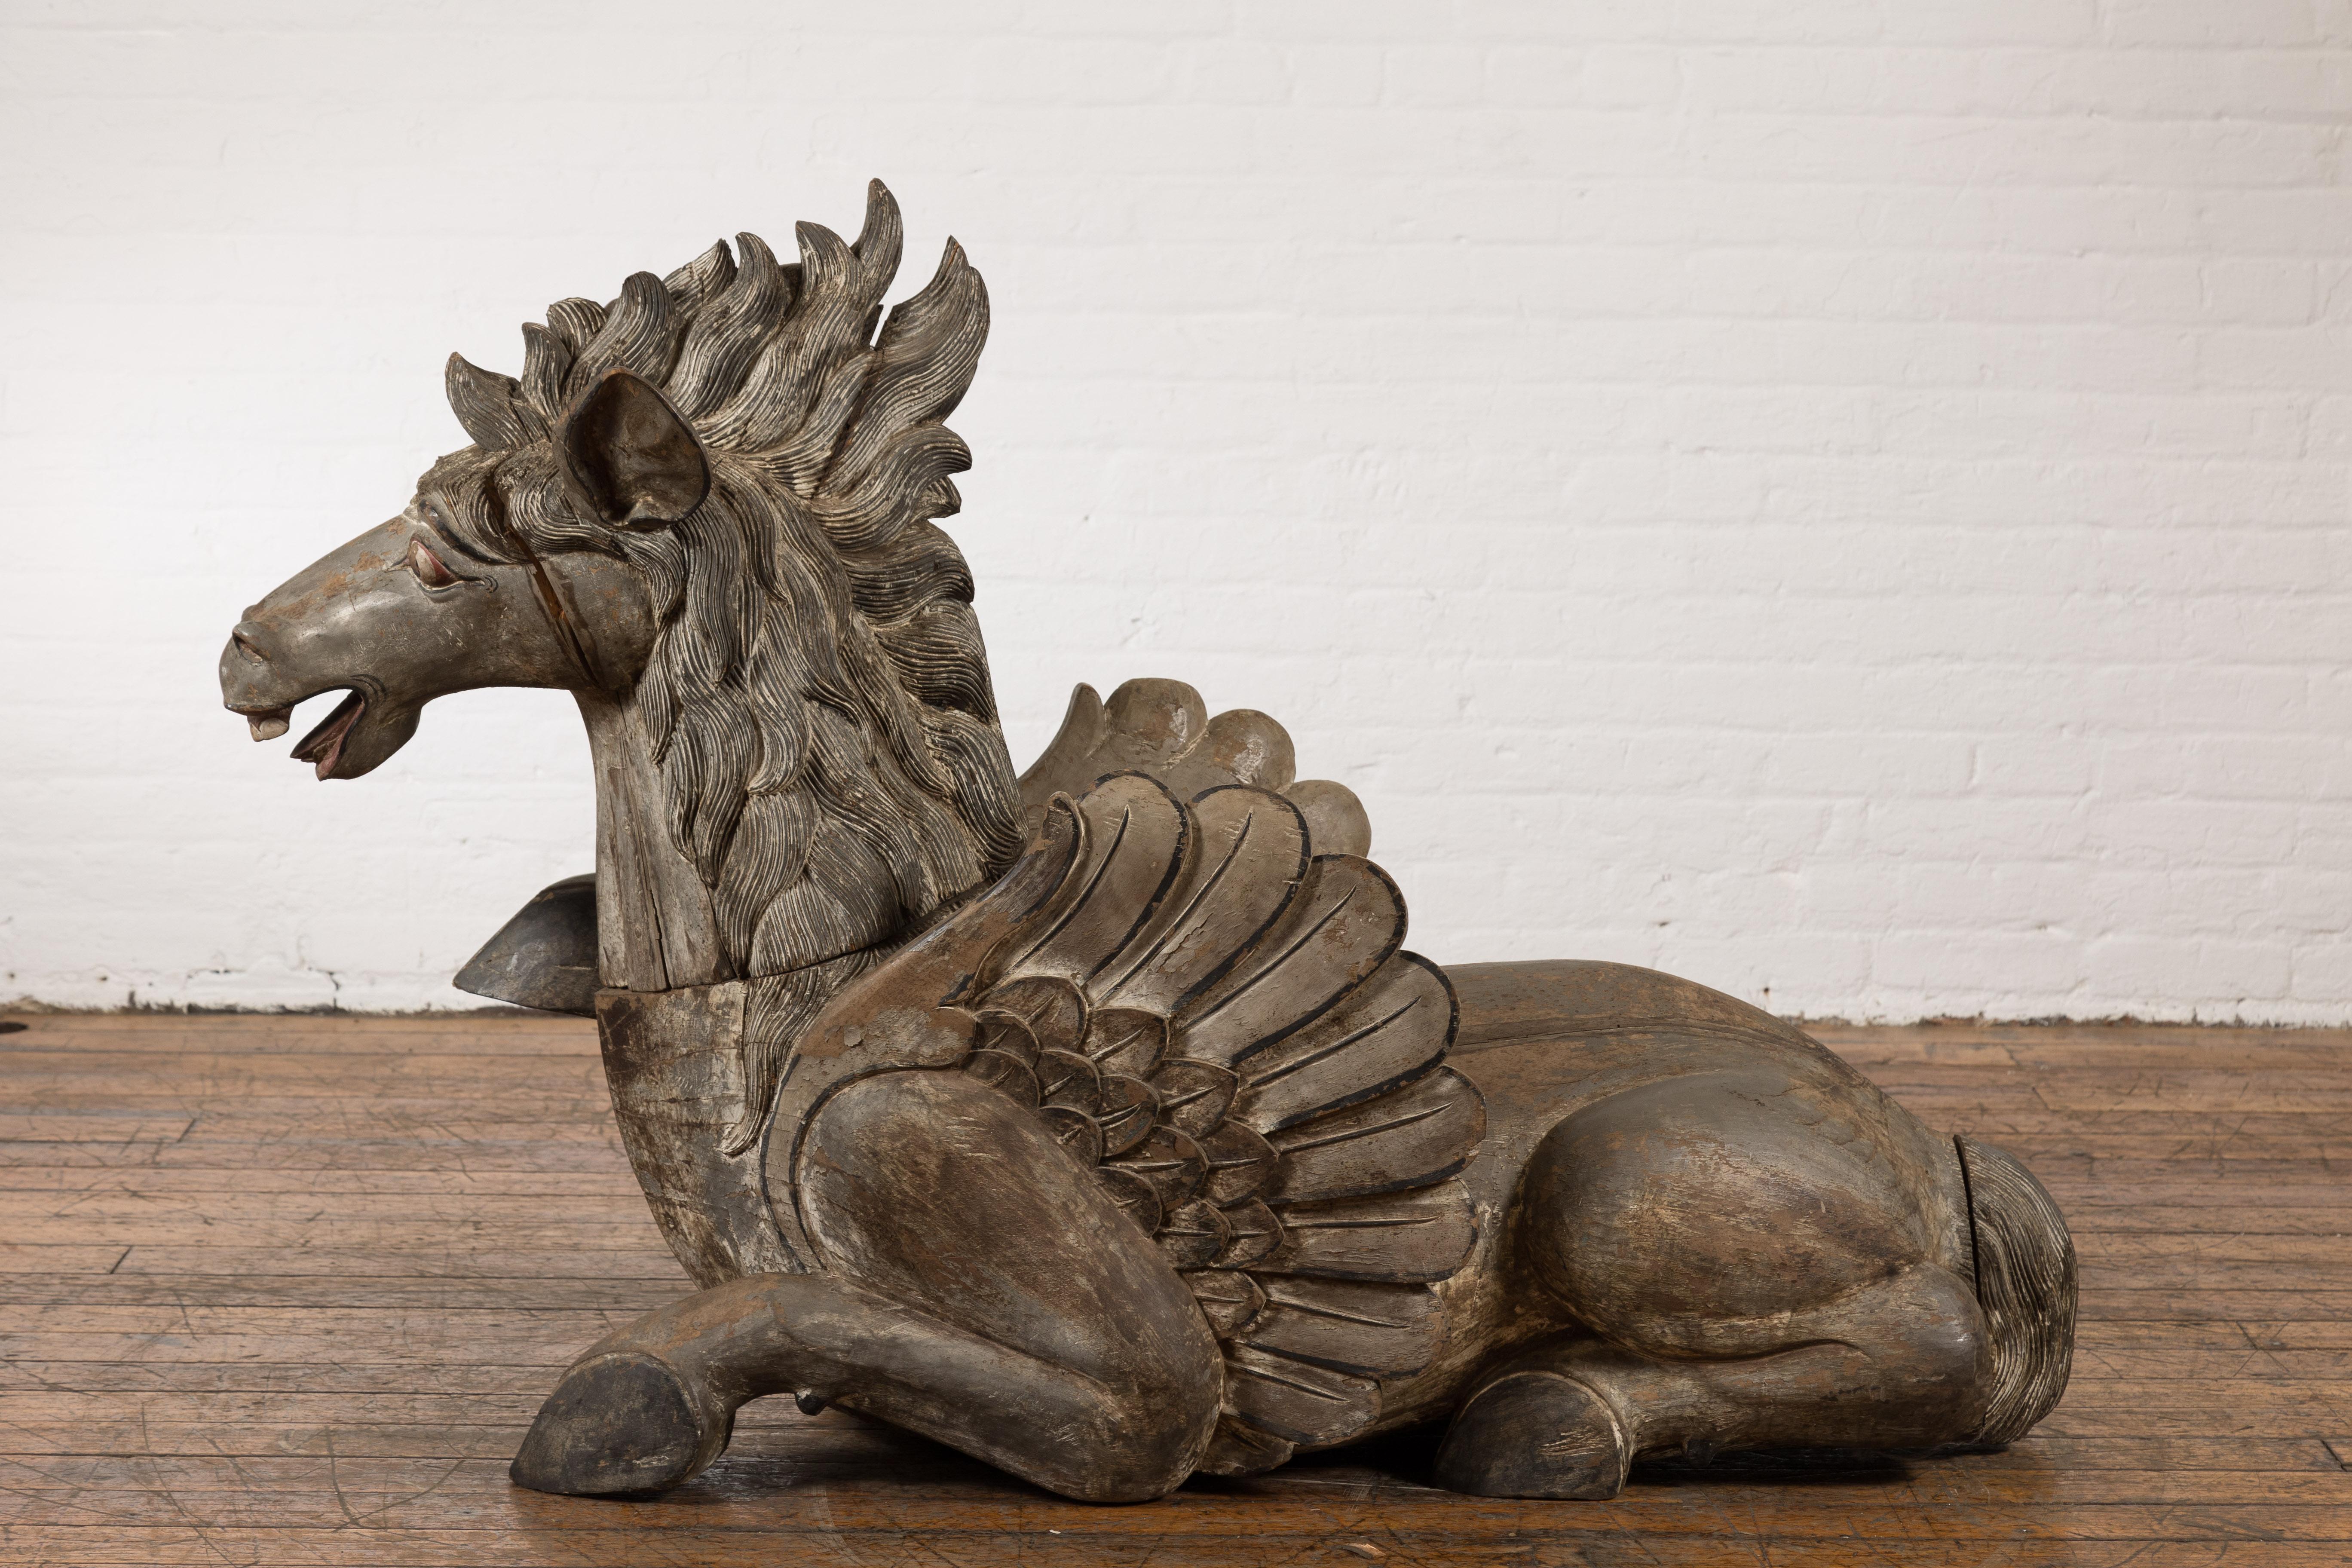 A vintage Thai carved and painted wooden winged horse from the mid 20th century, with nicely detailed mane, striking facial expression and weathered appearance. Exuding an ethereal charm, this vintage Thai wooden winged horse sculpture from the